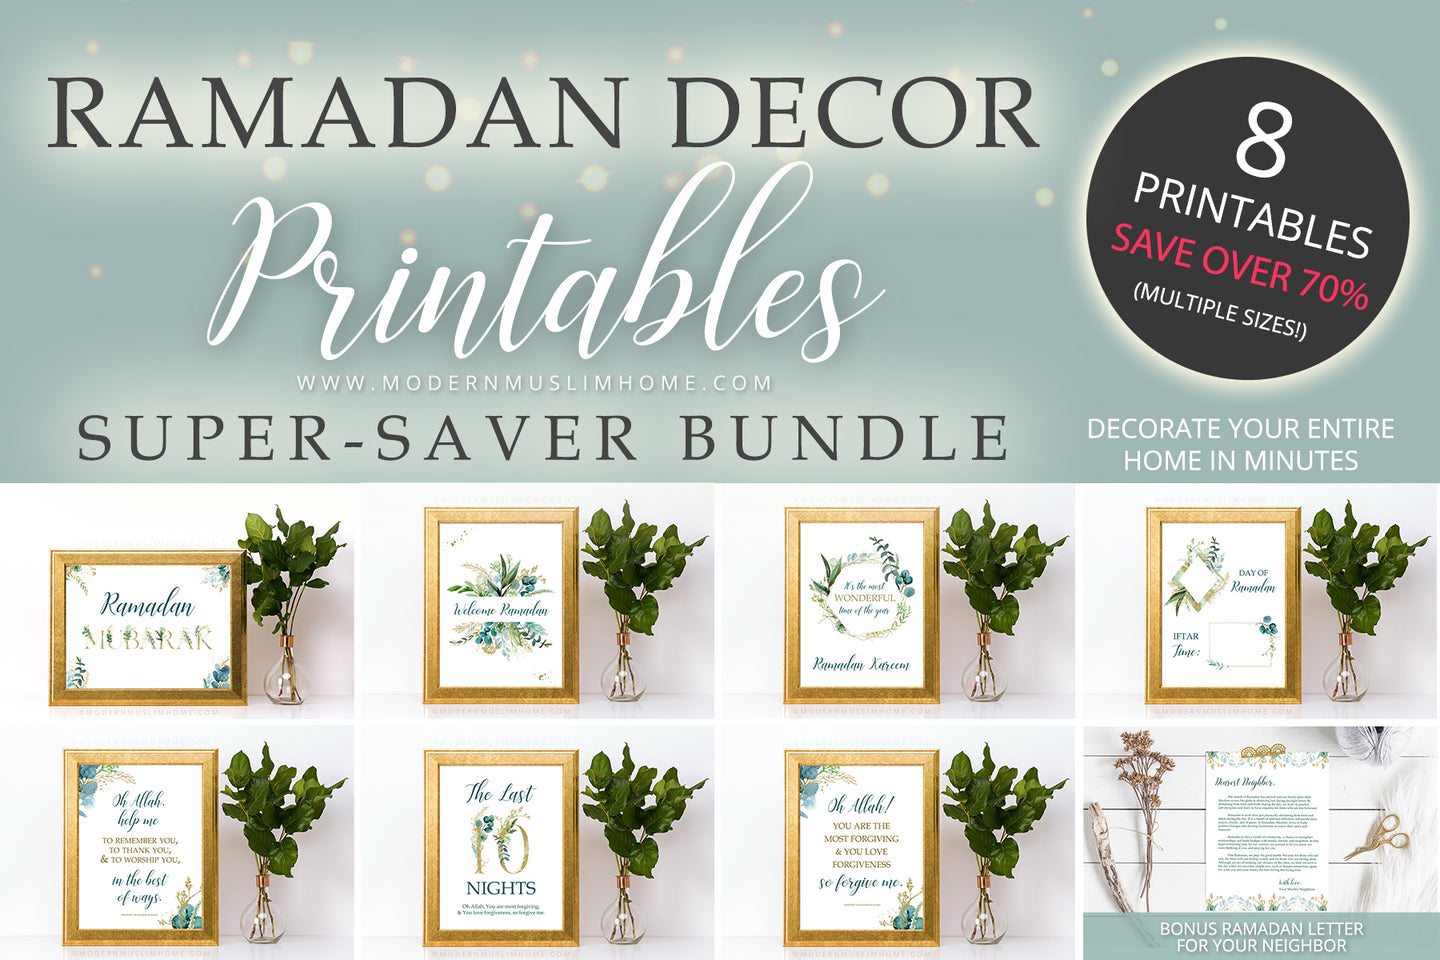 This is, without a doubt, the easiest and quickest way to decorate your home for Ramadan. This bundle includes almost ALL of our Ramadan Decor Printables for a stunning and cohesive look throughout your home. Simply download, print, and frame (or use however you wish)! This bundle is a limited-time offer, saving you more than 70% off. 